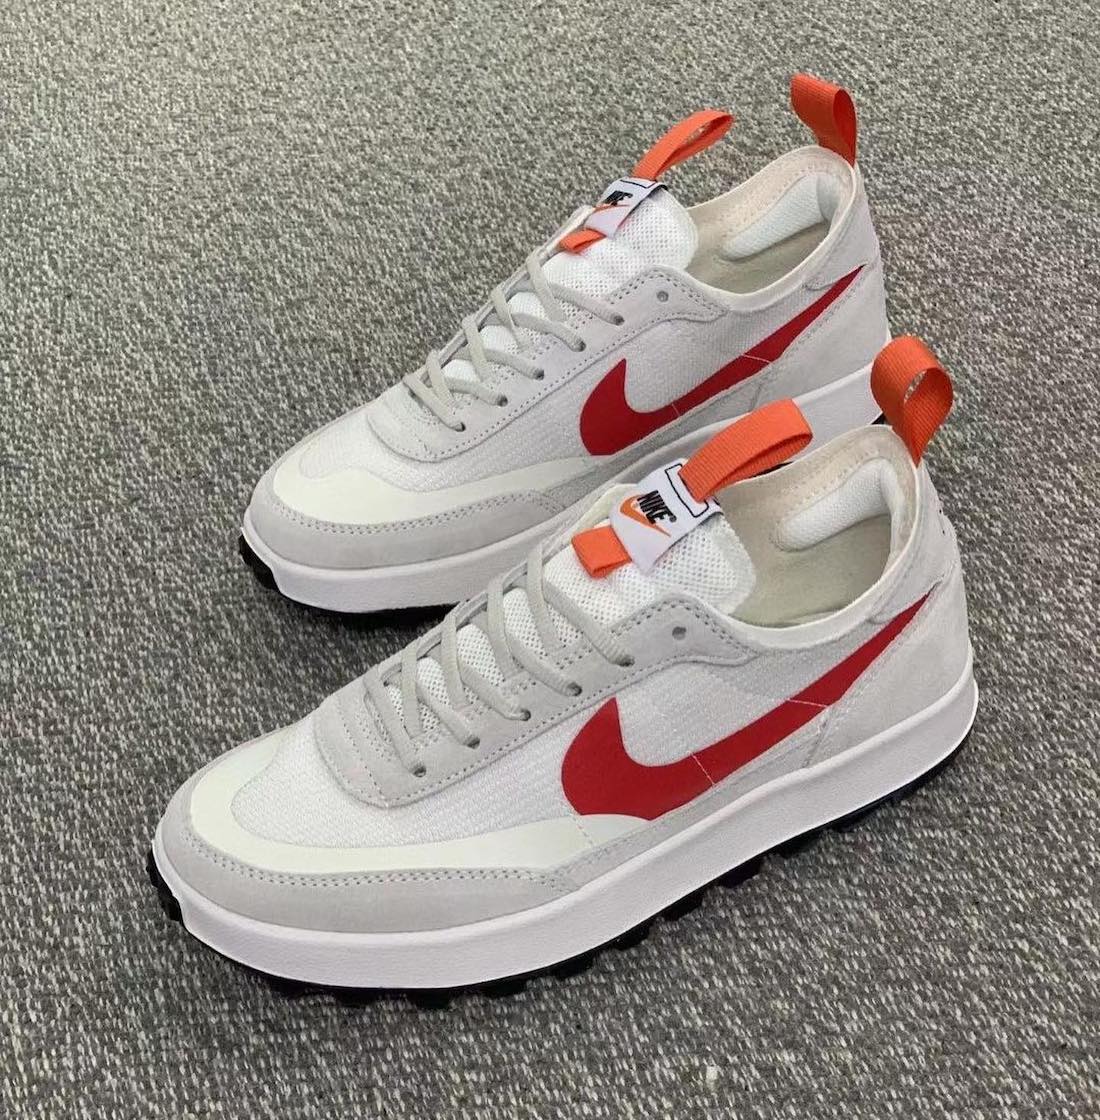 Tom Sachs NikeCraft General Purpose Shoe White Red Release Date